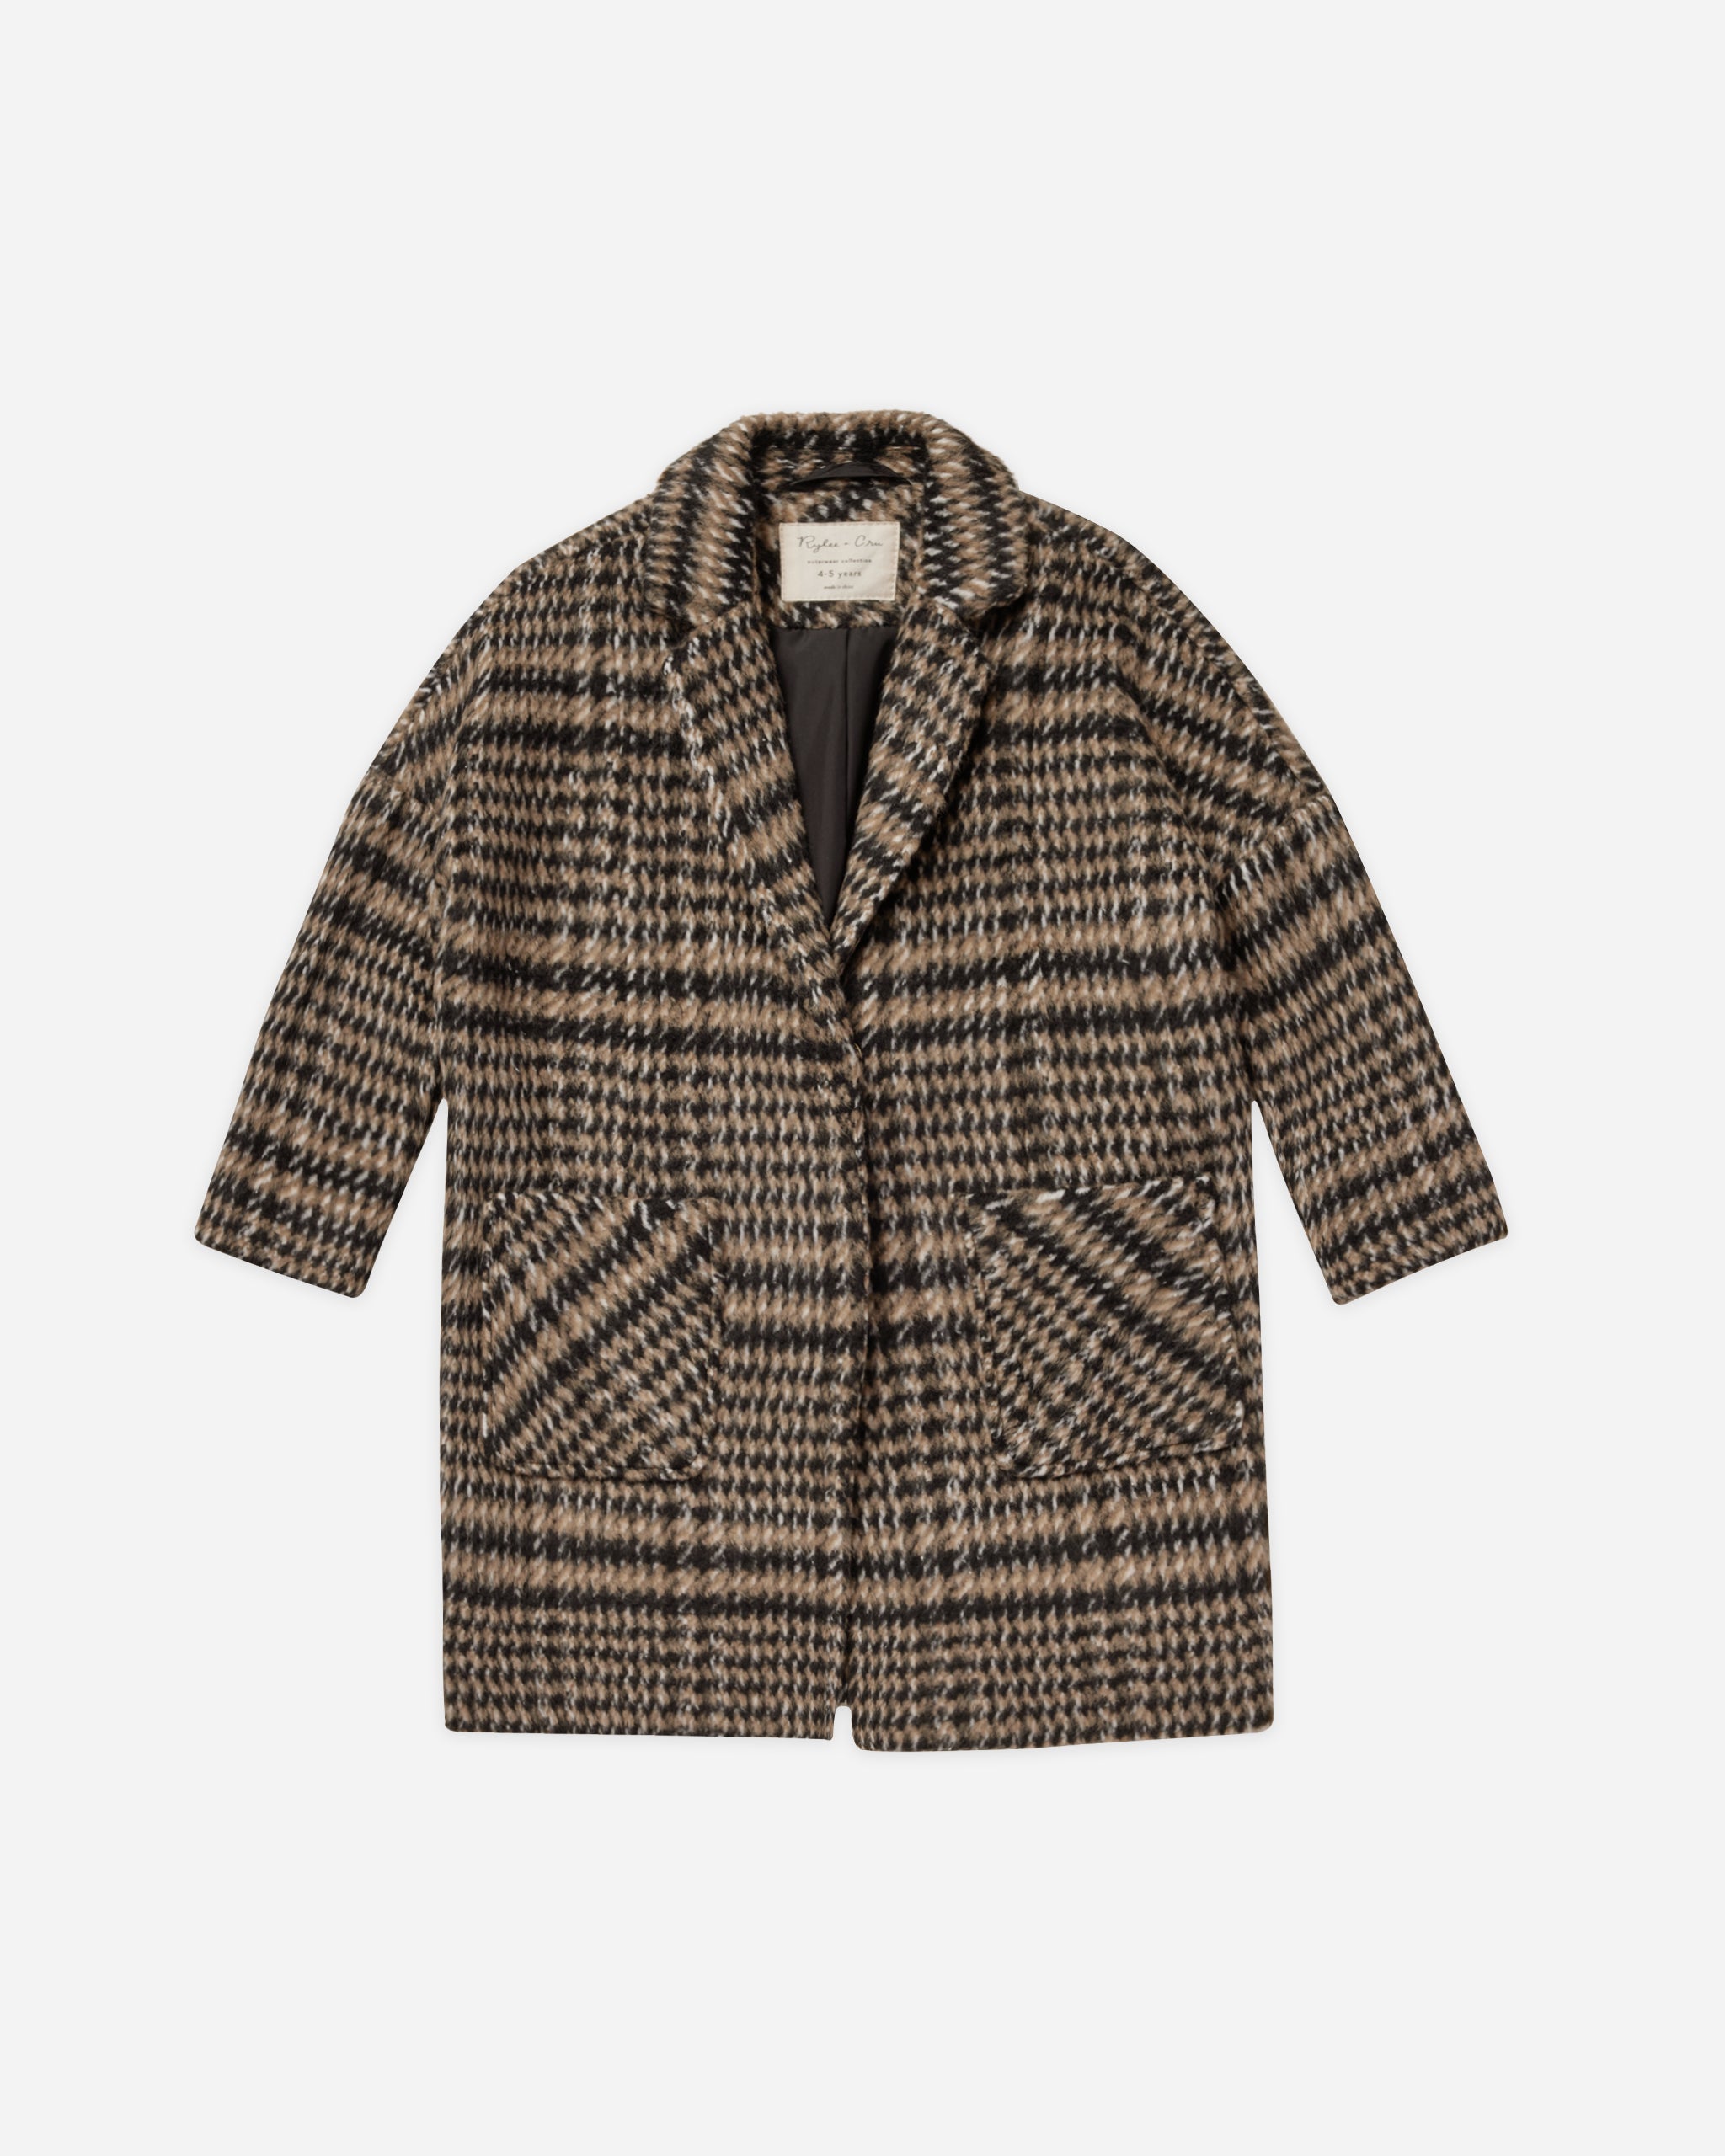 Longline Coat || Brown Houndstooth - Rylee + Cru | Kids Clothes | Trendy Baby Clothes | Modern Infant Outfits |